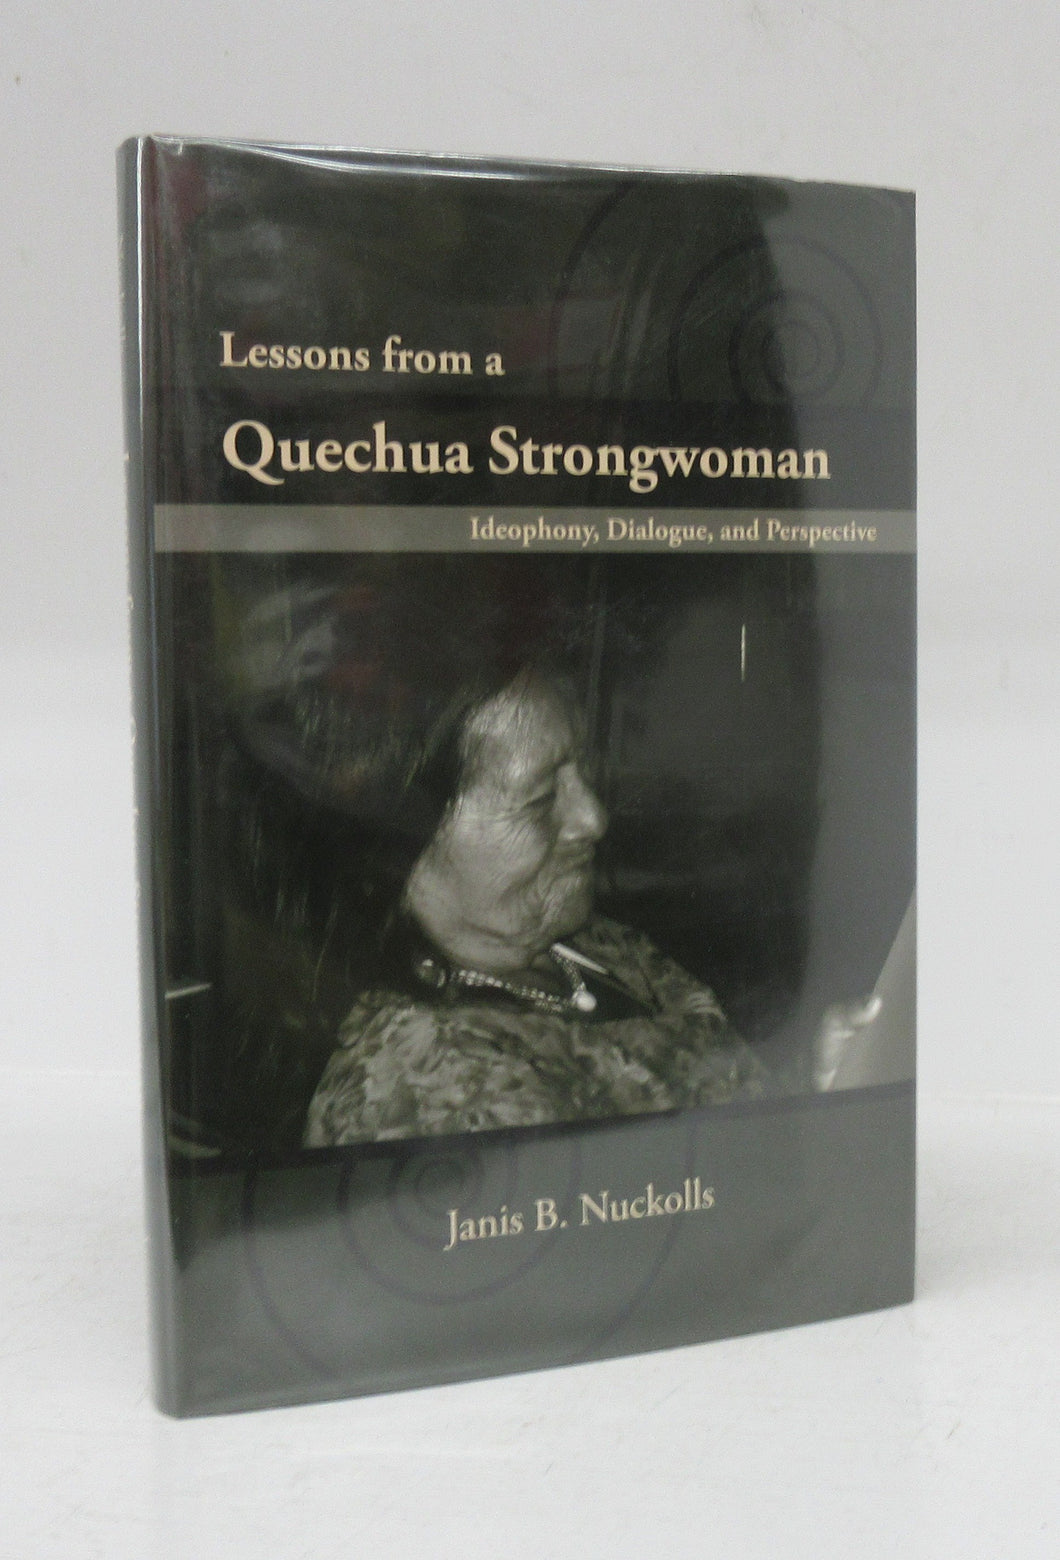 Lessons from a Quechua Strongwoman: Ideophony, Dialogue, and Perspective